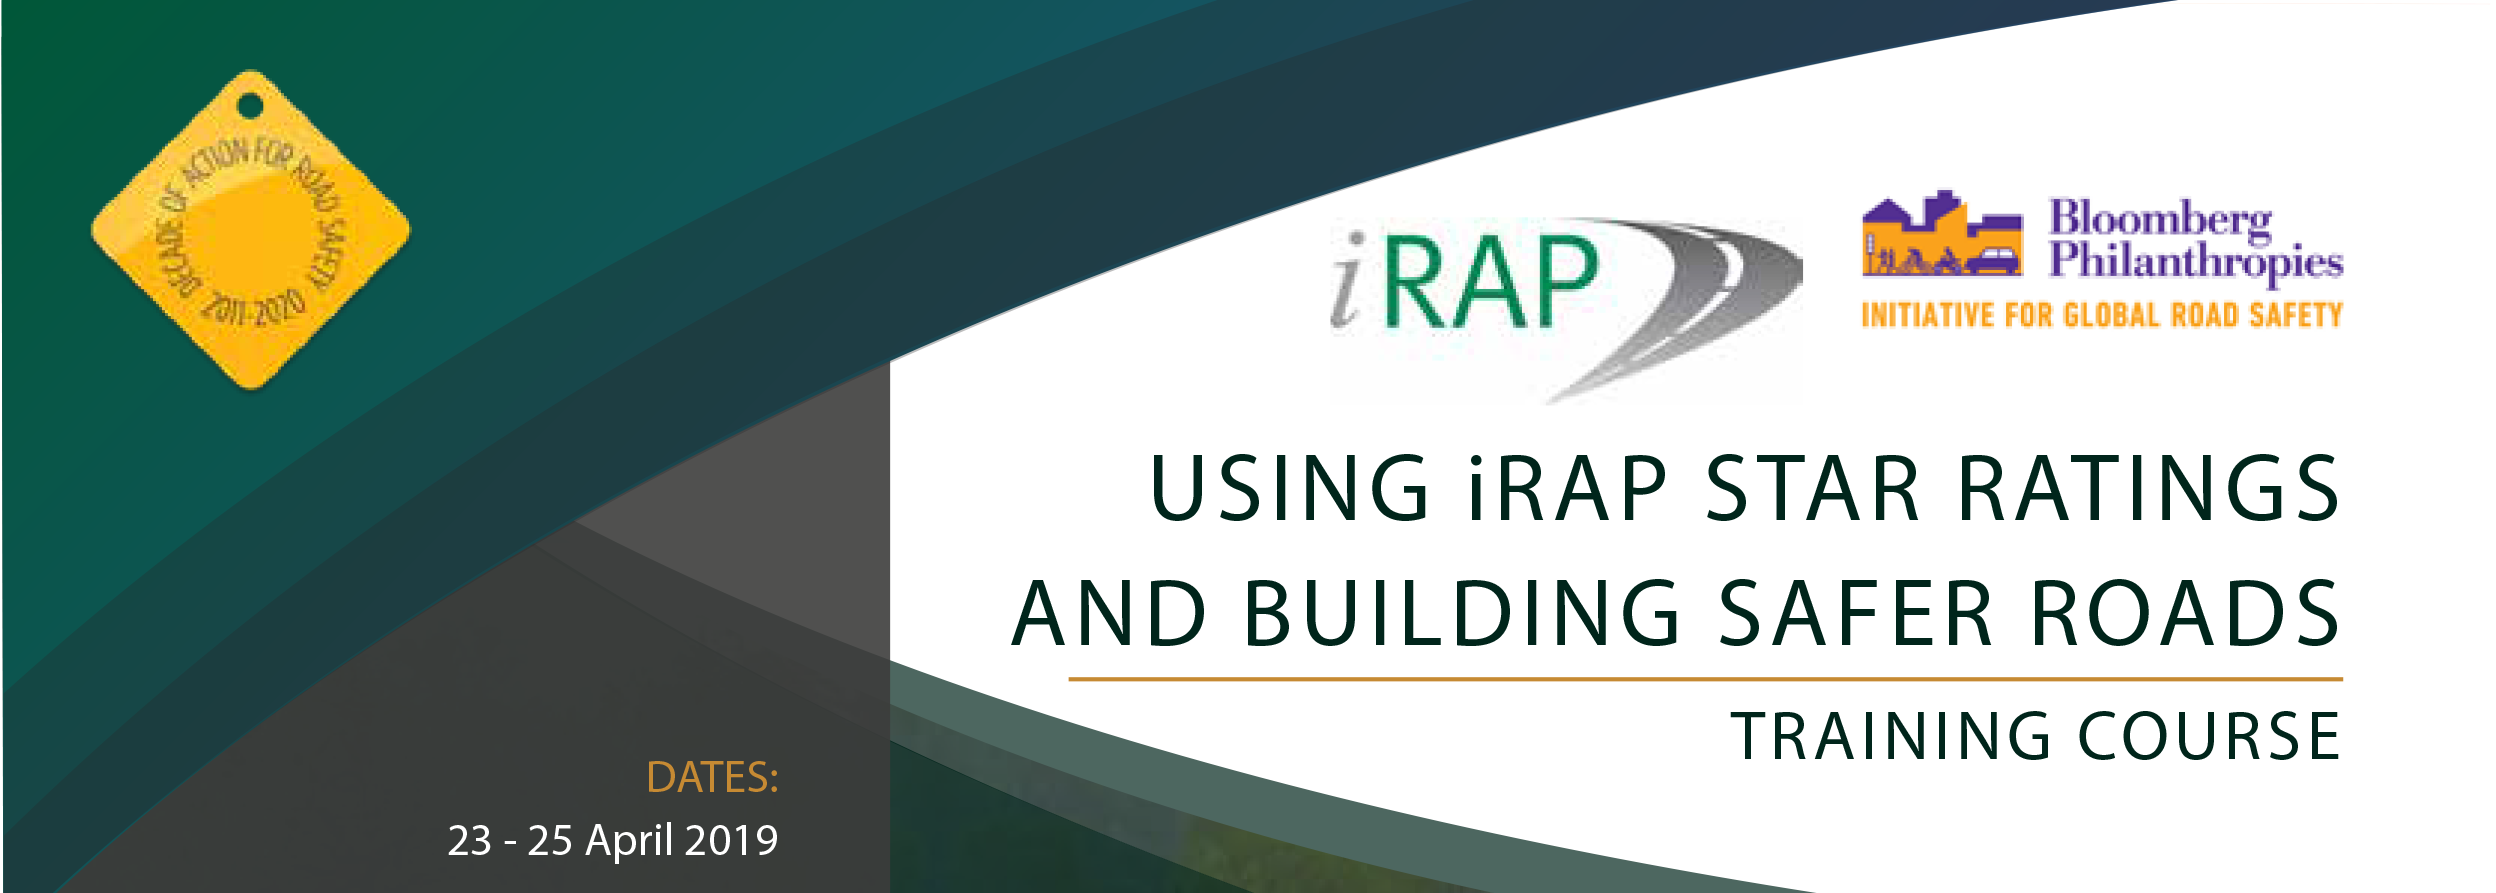 Upcoming Training Course: Using iRAP Star Ratings and Building Safer Roads (April 2019)